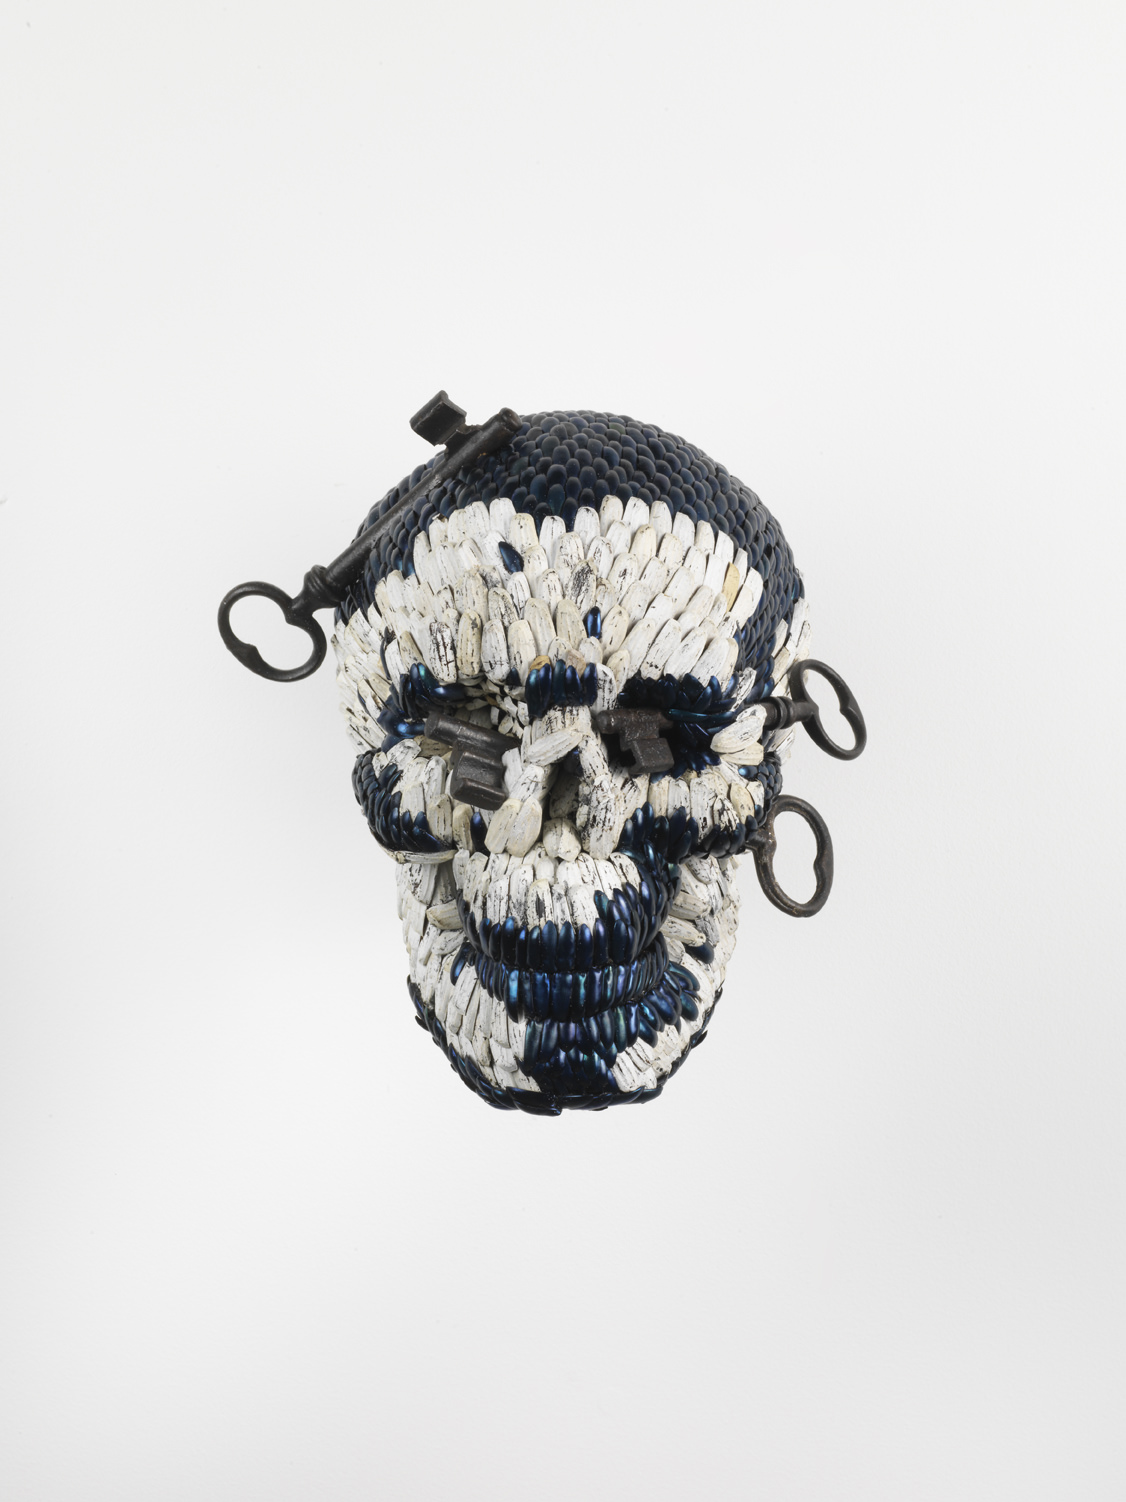 Jan Fabre, Skull with the Keys of Hell, 2013, Mixture of jewel beetle wing-cases, polymers, iron, 23 x 21 x 20cm